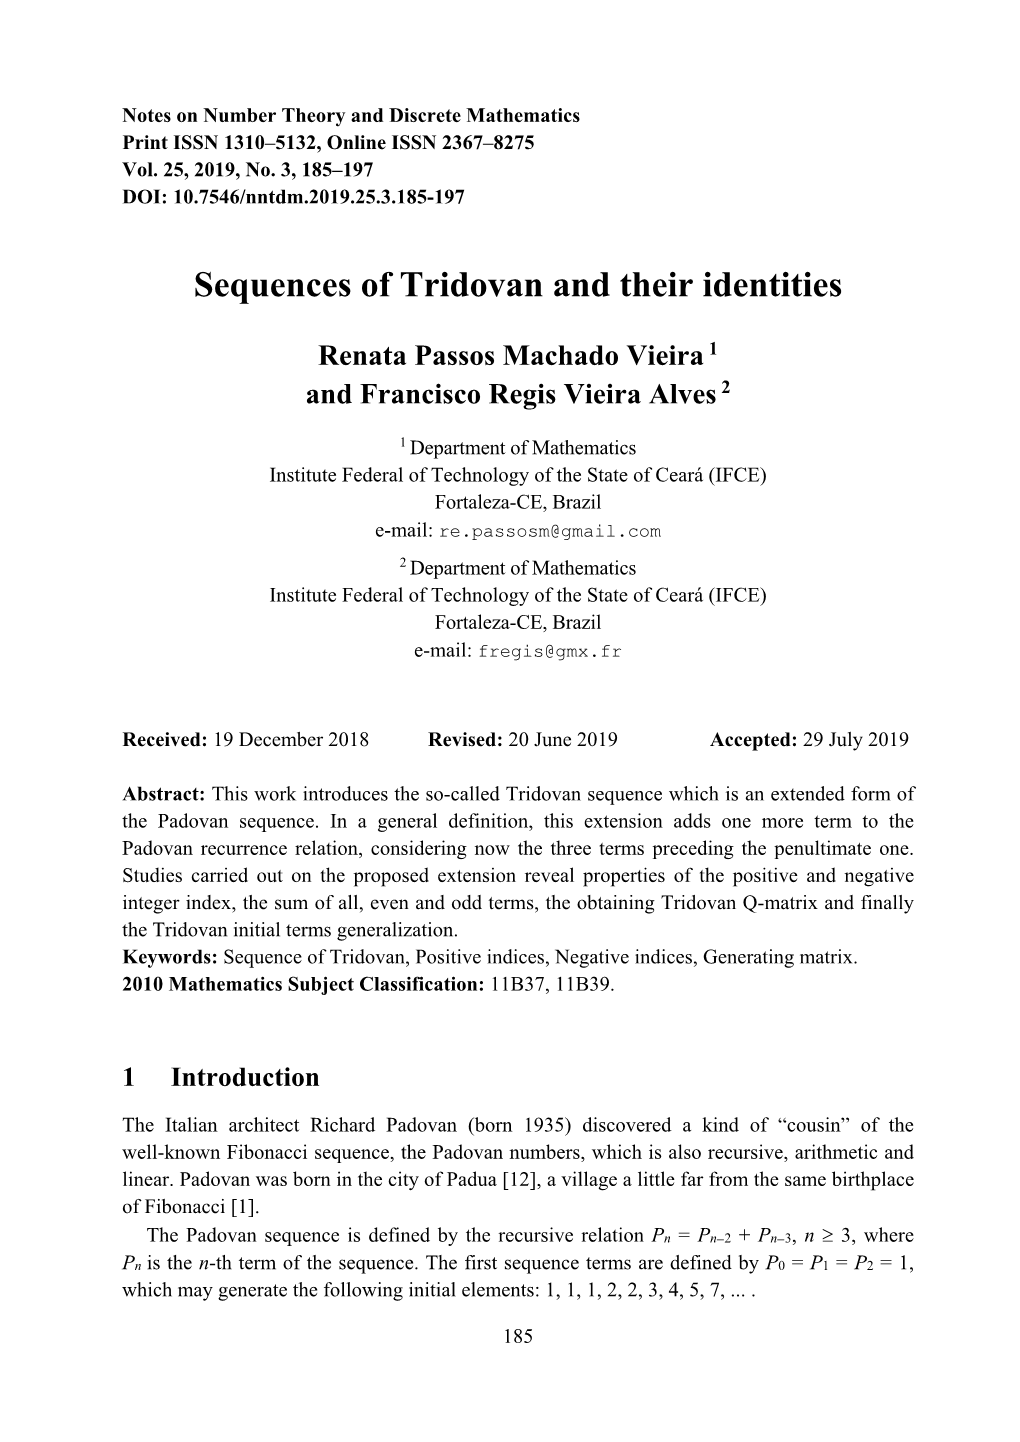 Sequences of Tridovan and Their Identities